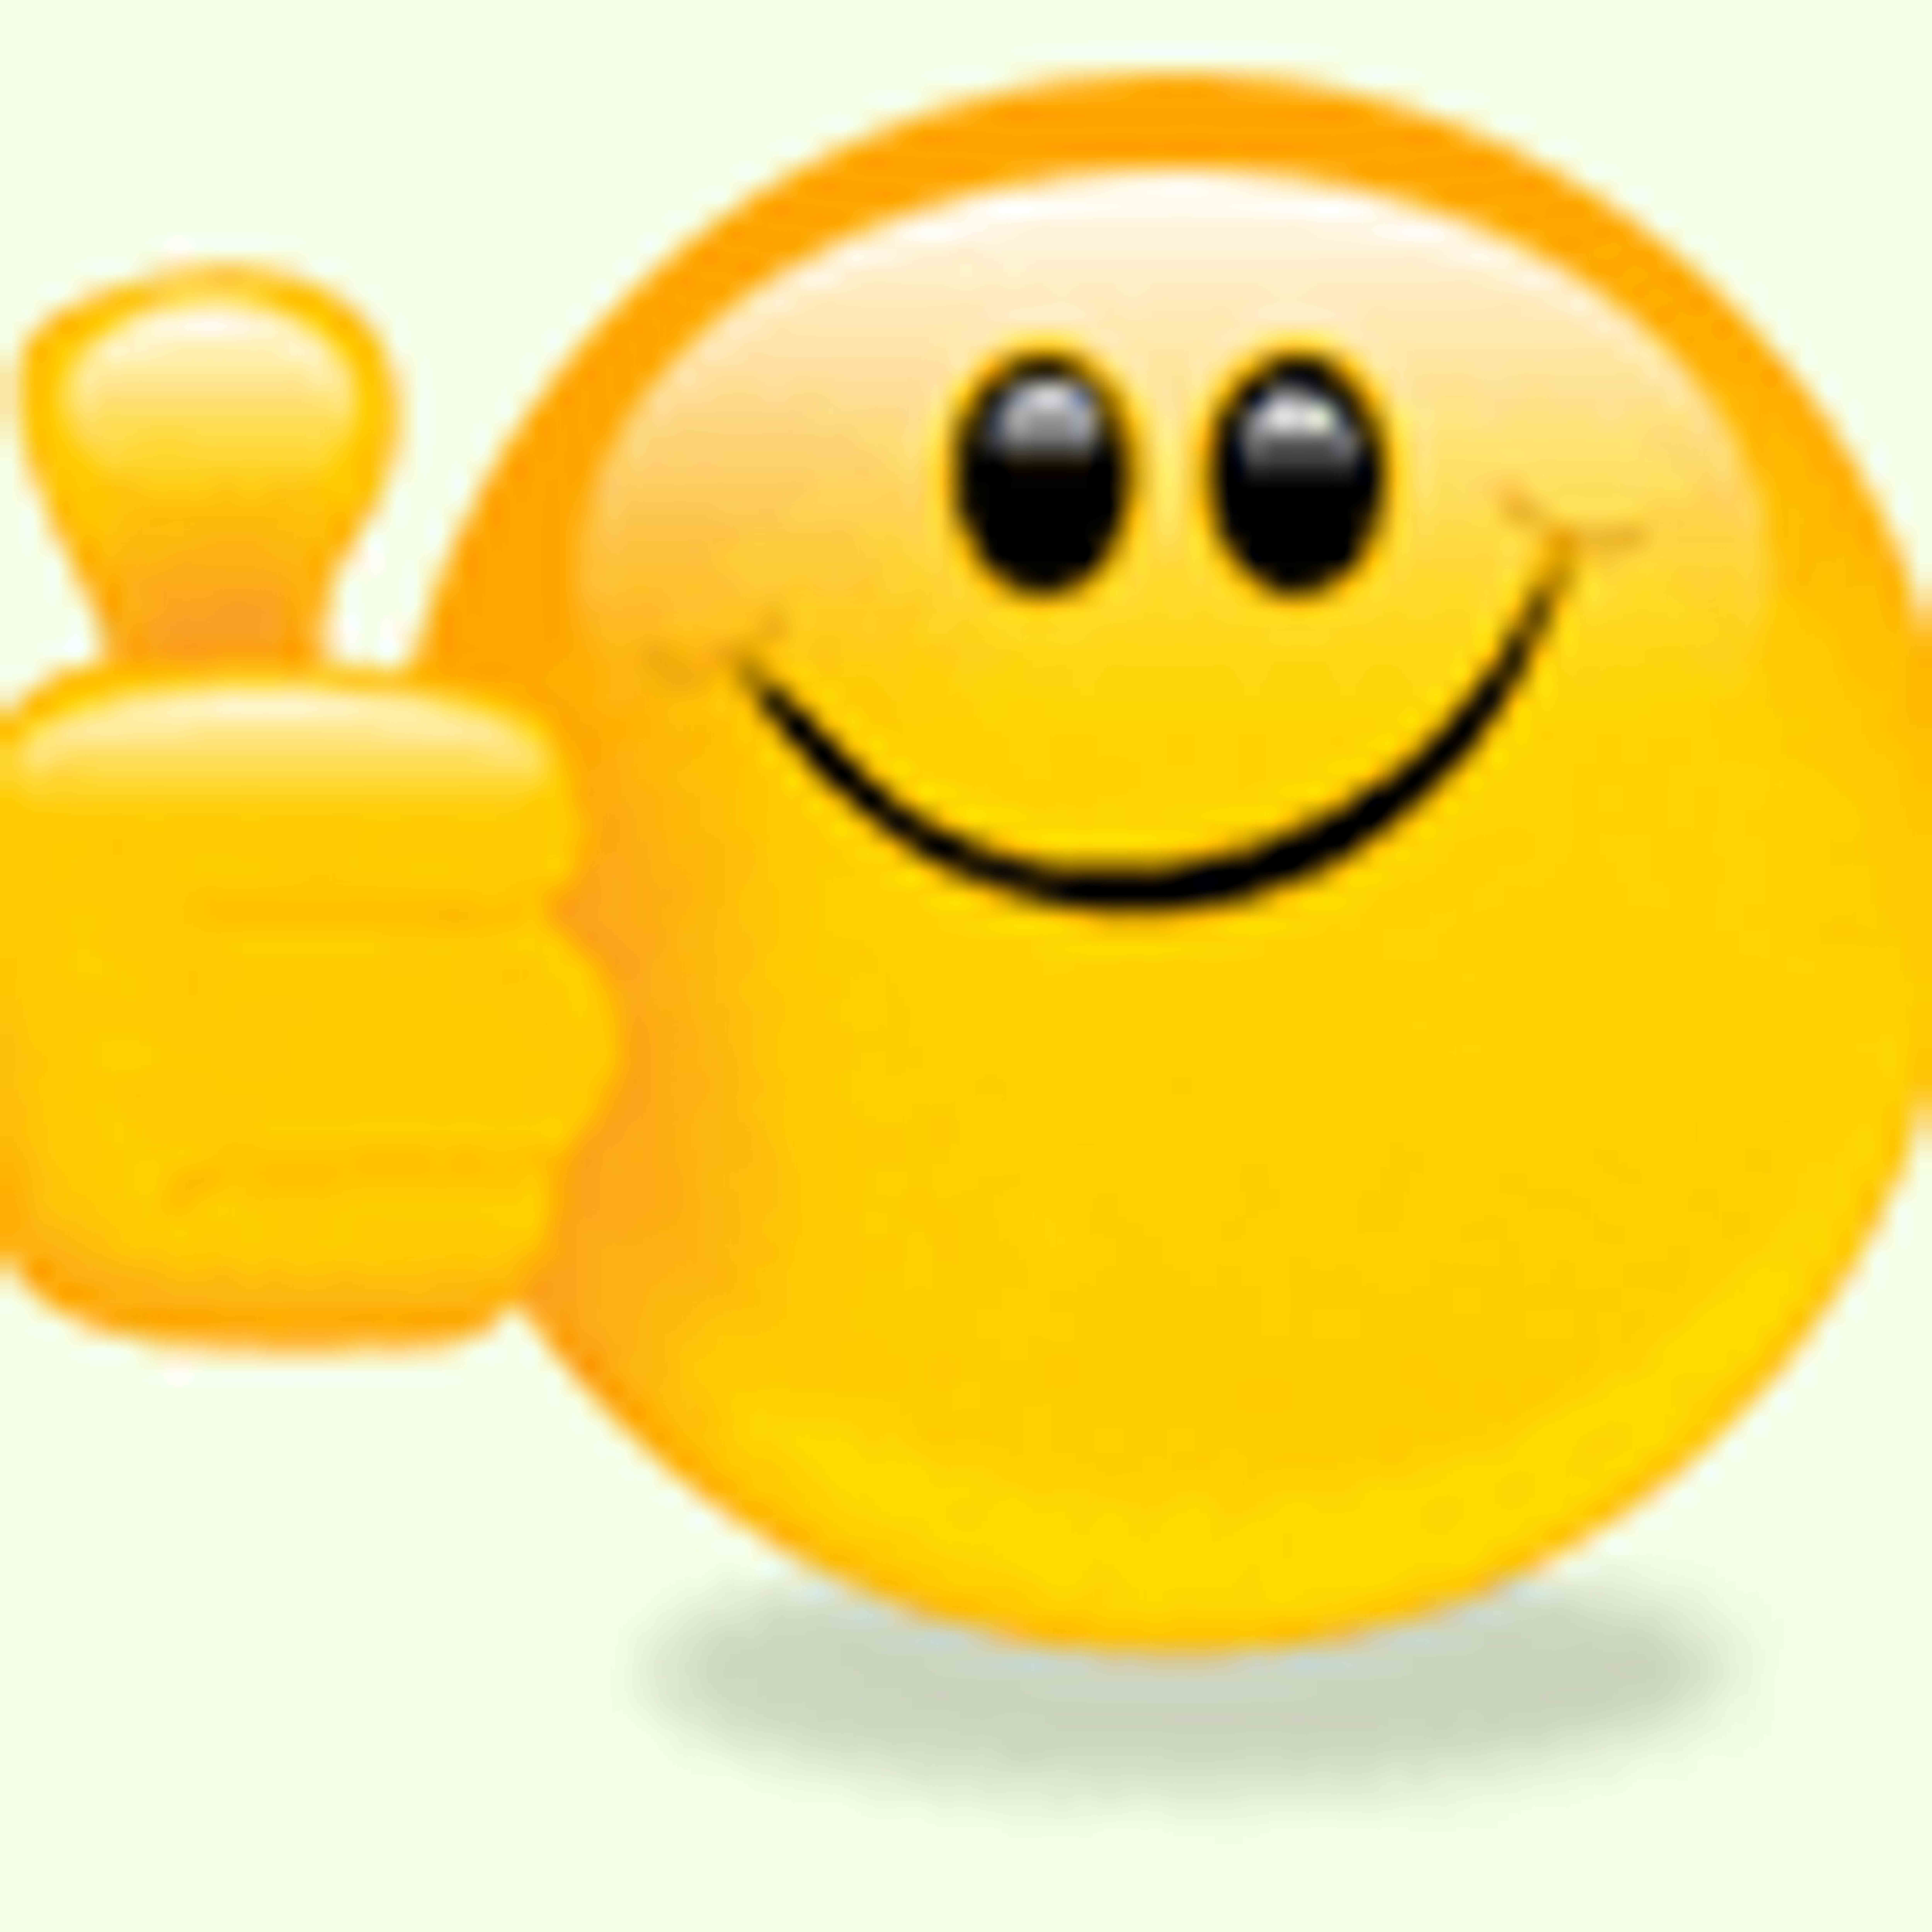 The Thumbs Up Emoticon On Facebook Messages / Social // Drowned In ...